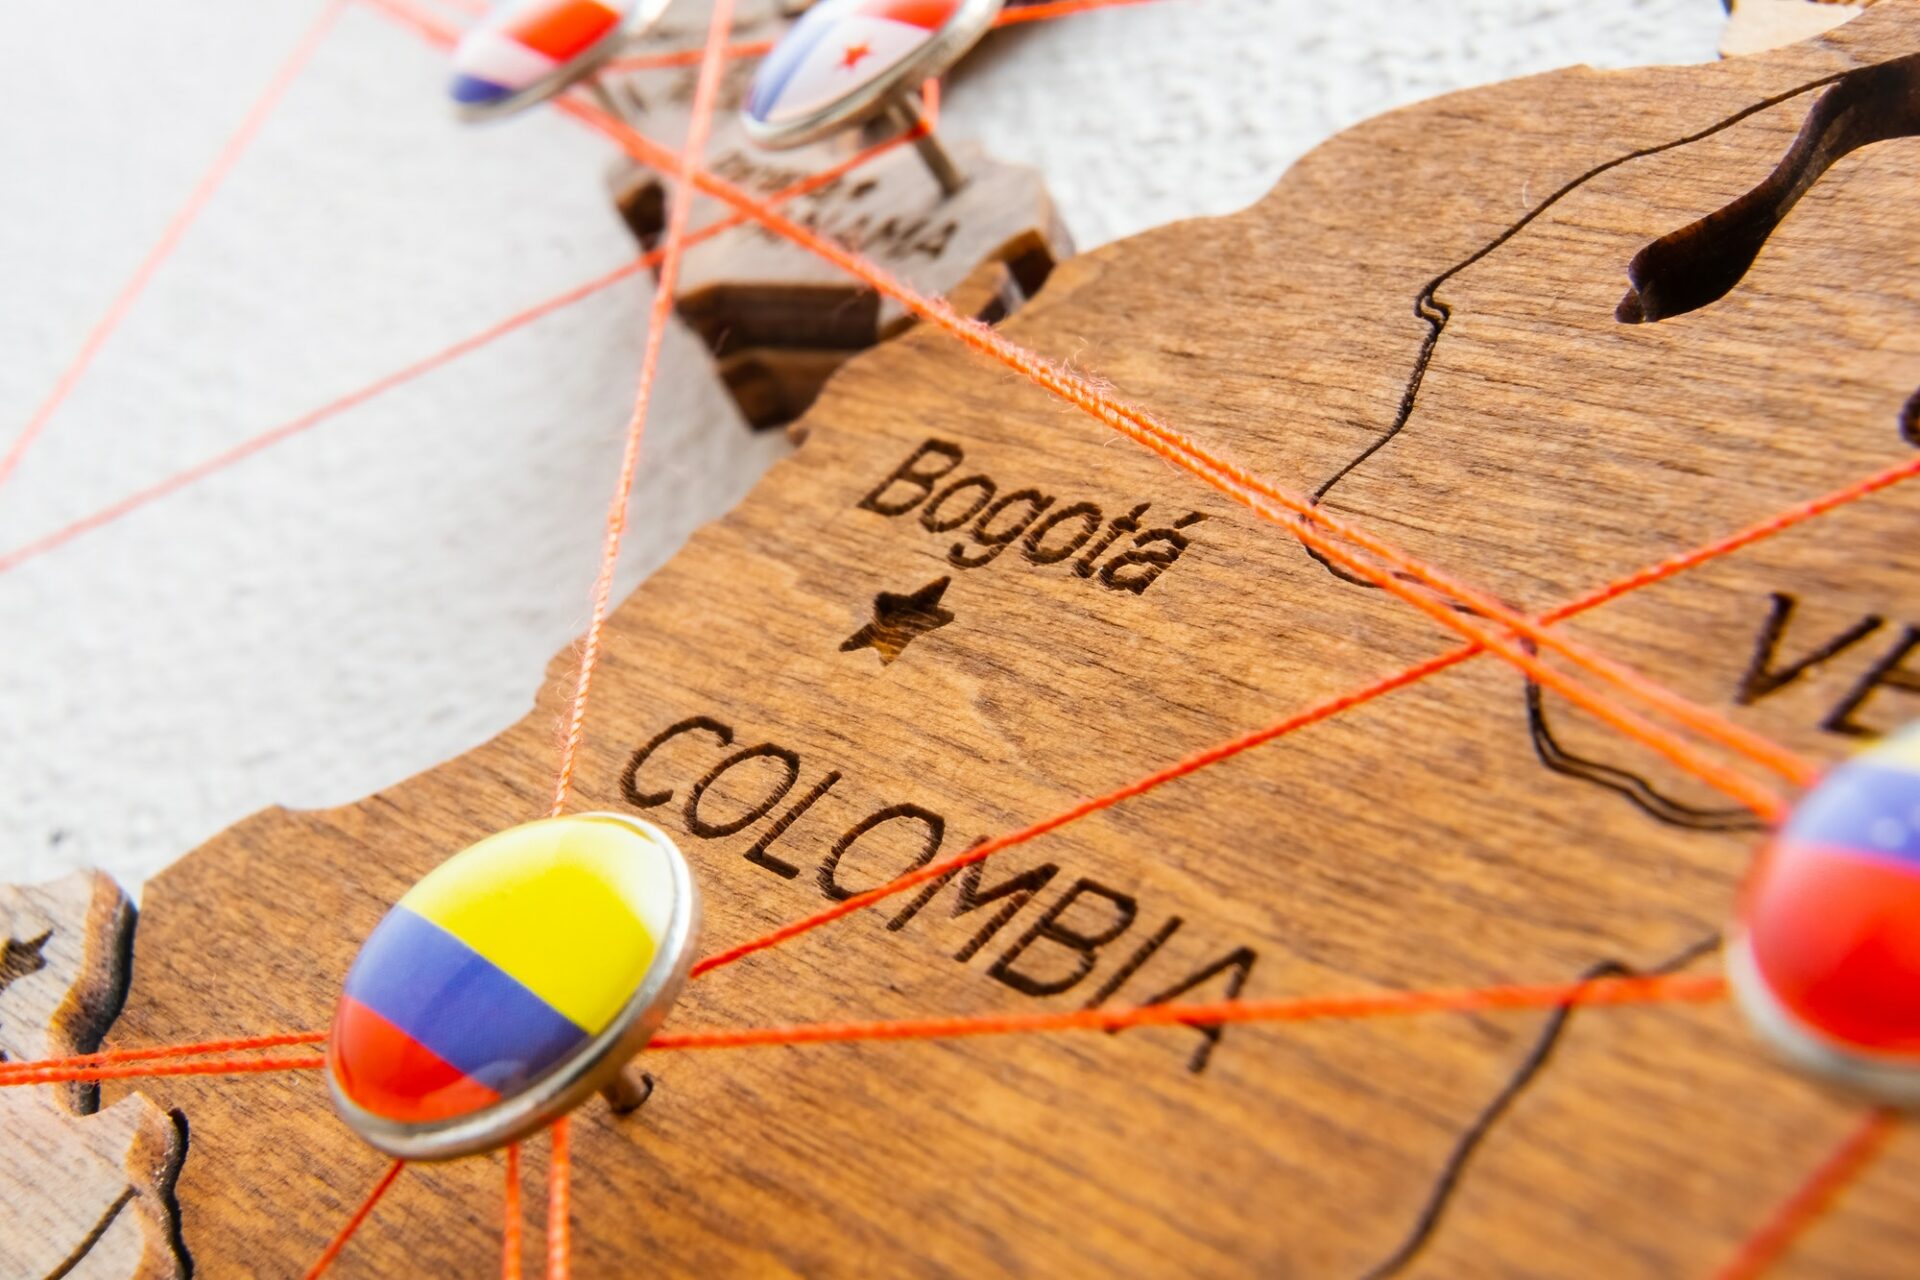 Colombia flag pins and red thread for traveling and planning trip.